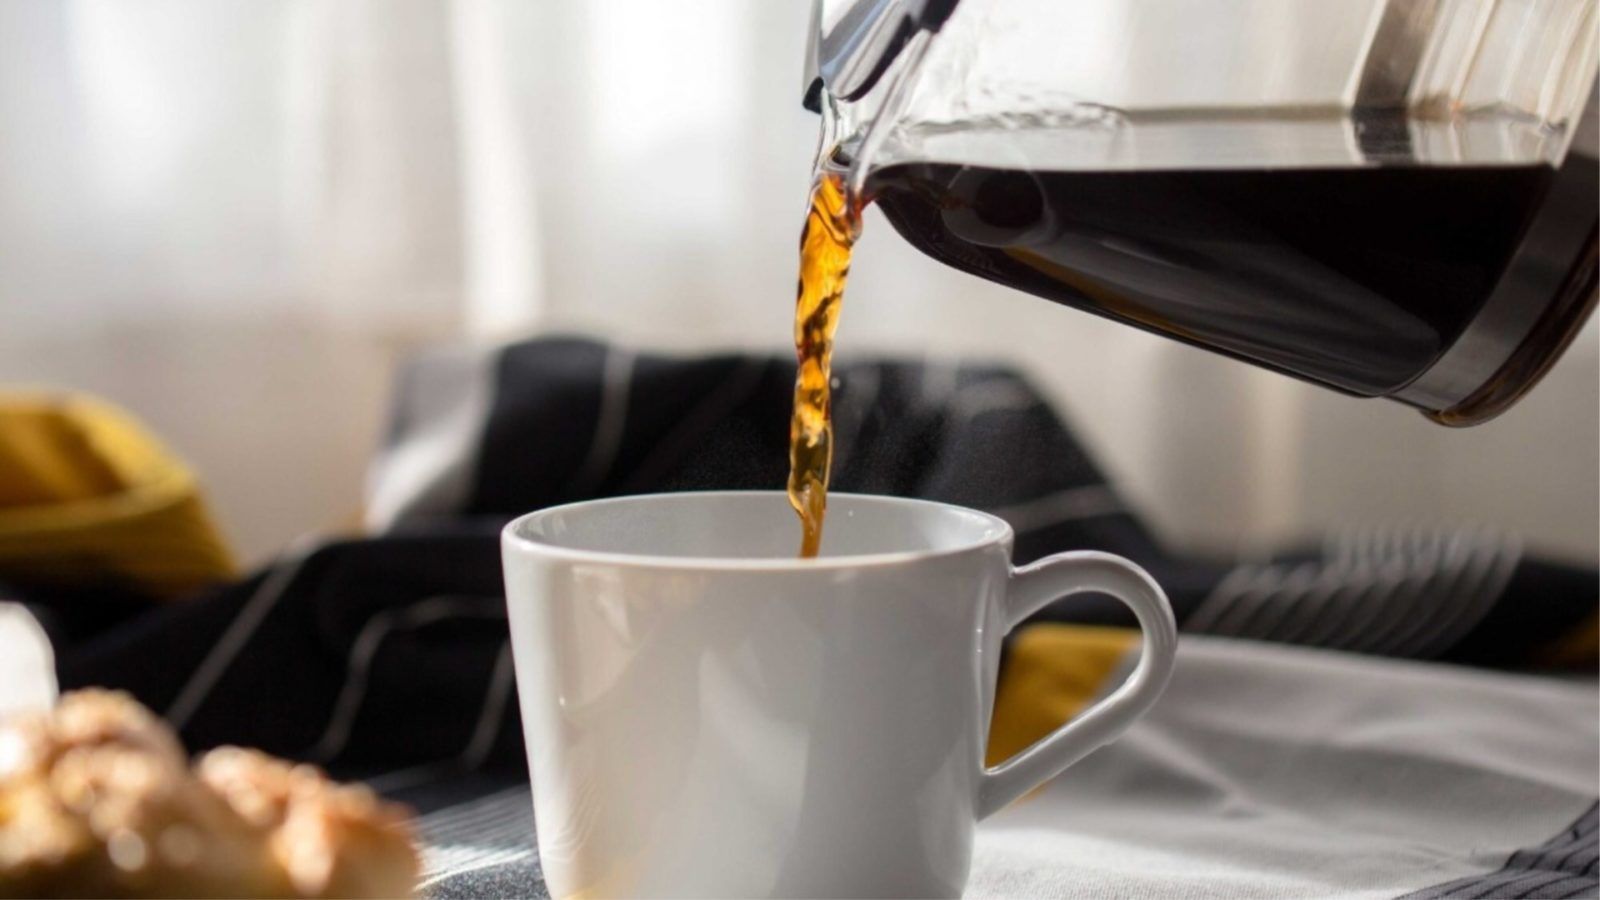 Drinking two to three cups of coffee every day could help you live longer, new study finds